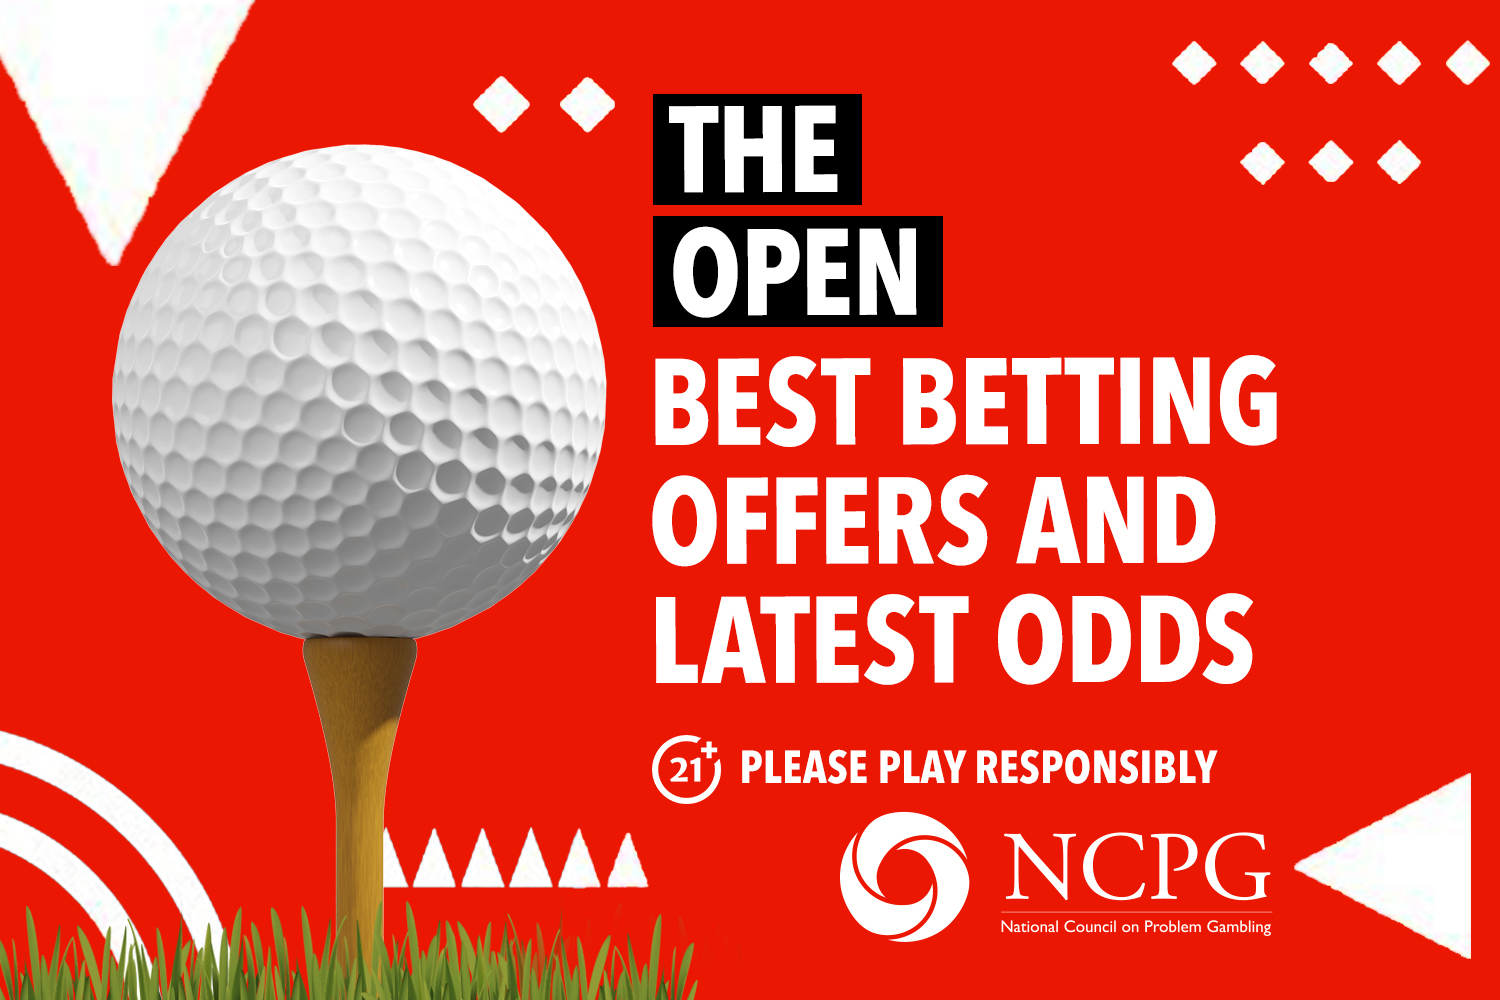 Photo: open golf betting offers